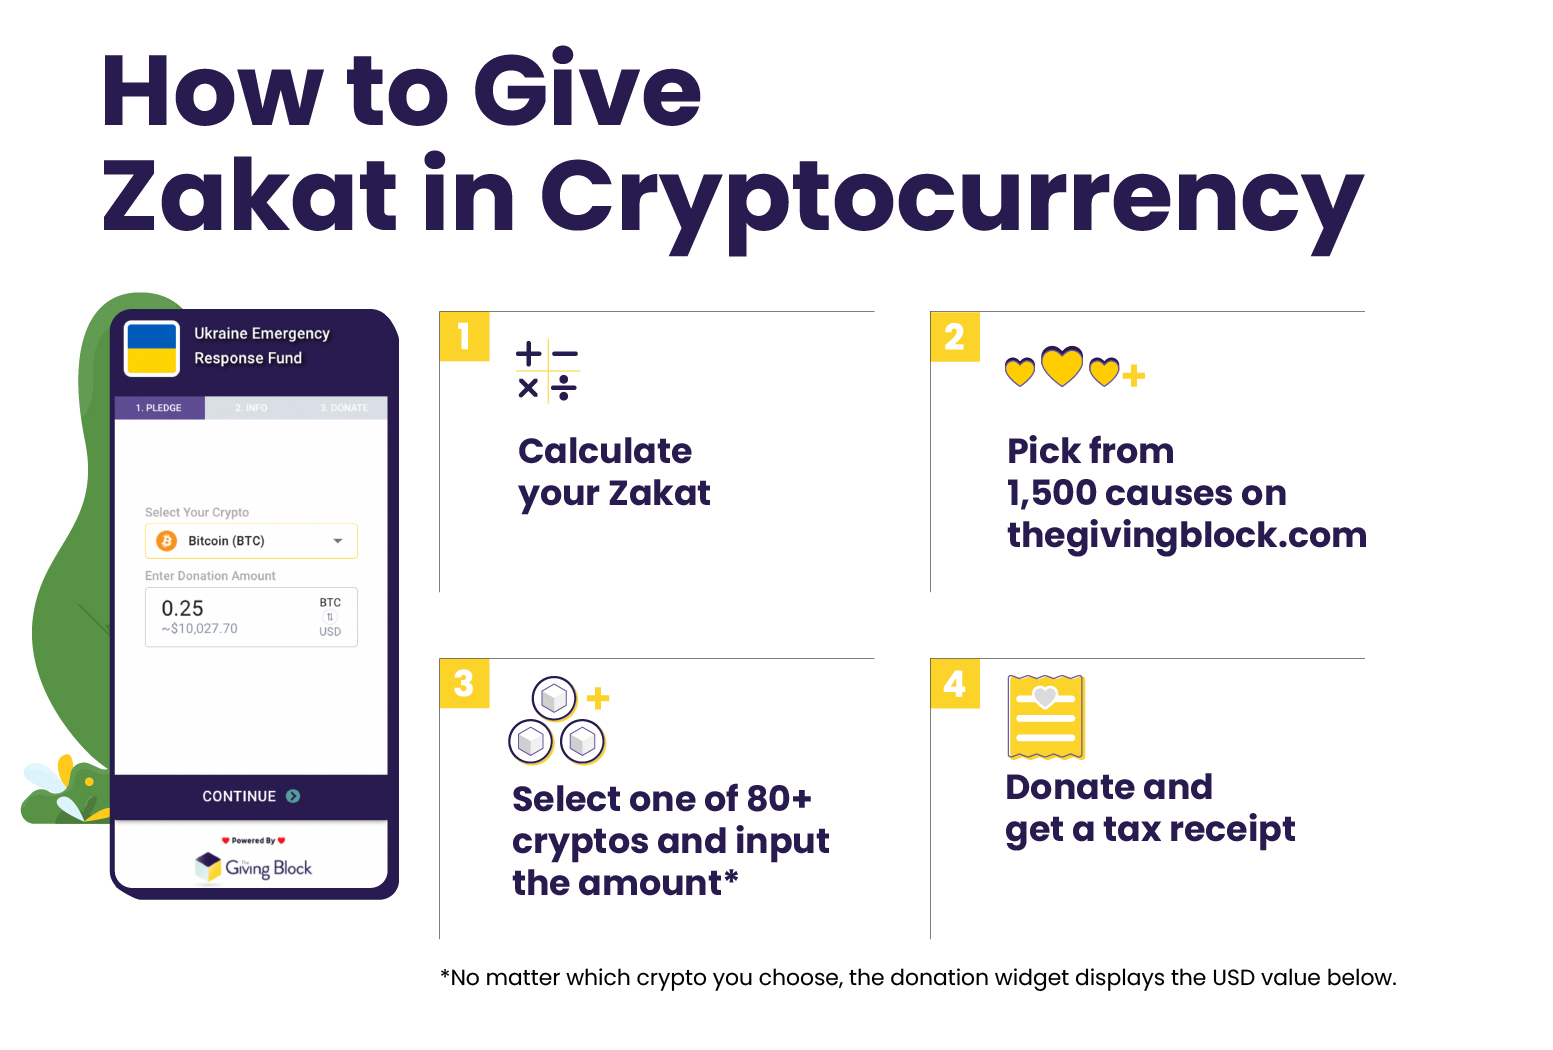 How to Give Zakat | The Giving Block